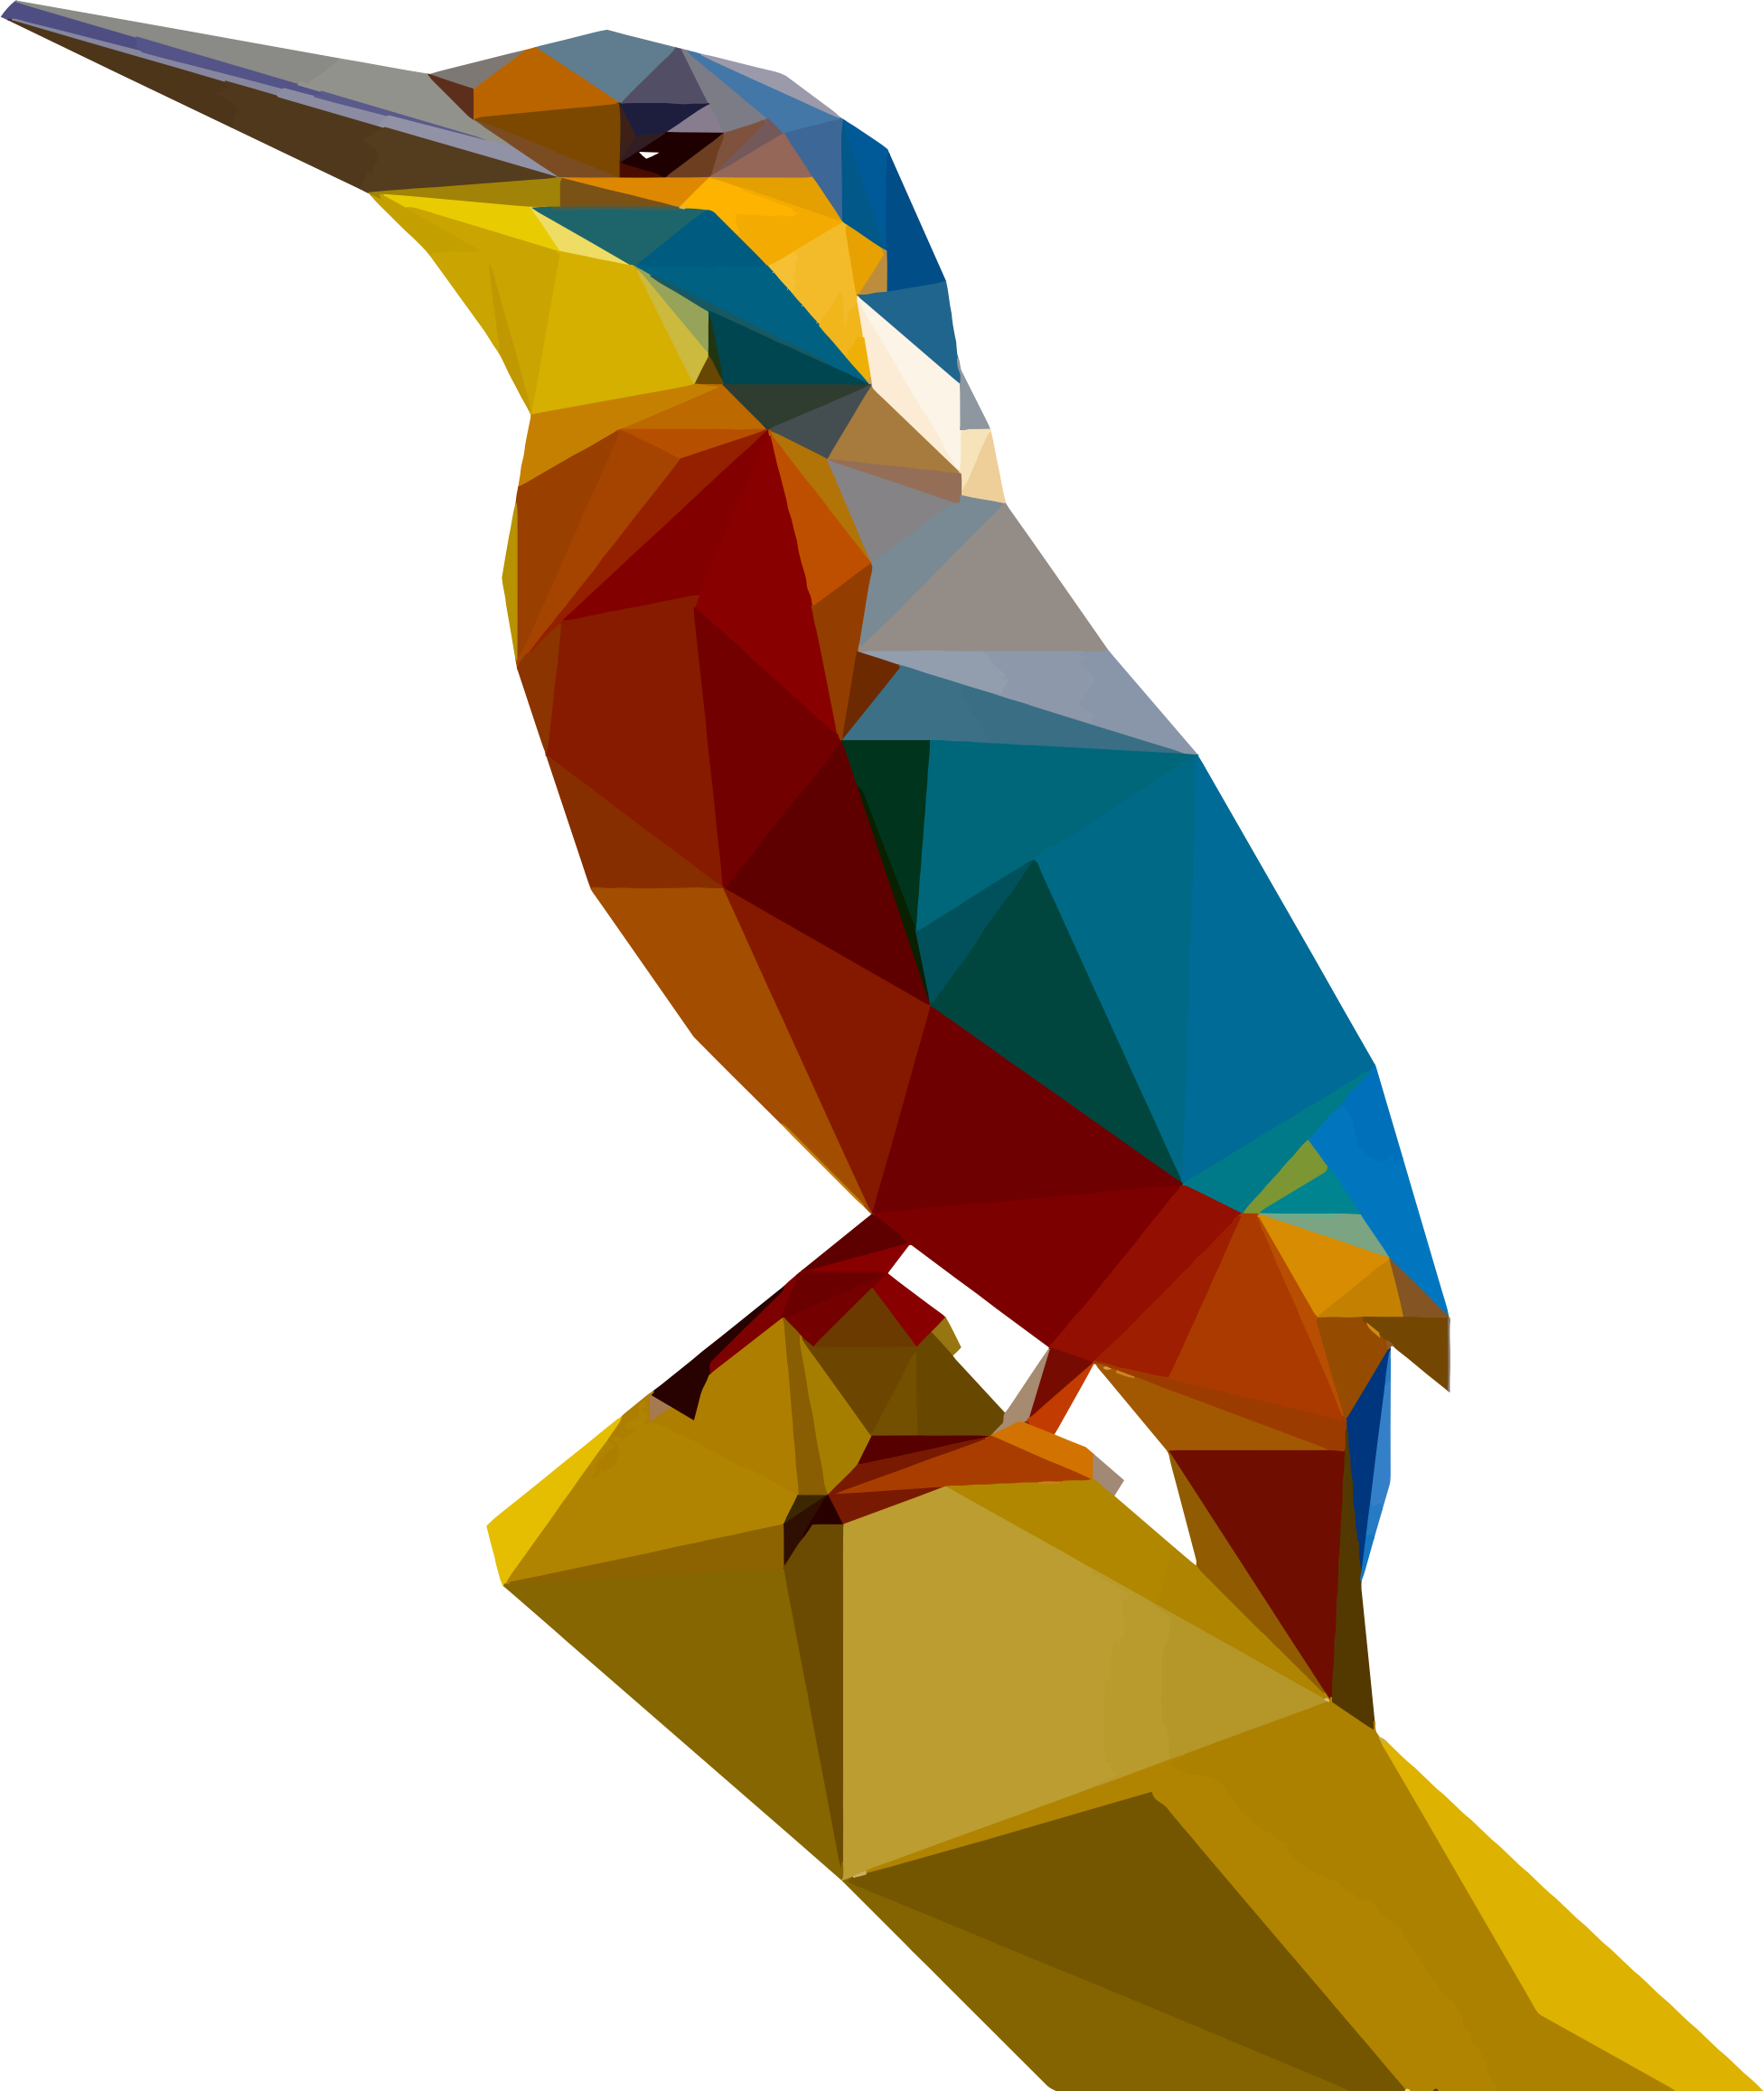 Kingfisher PNG Background Image